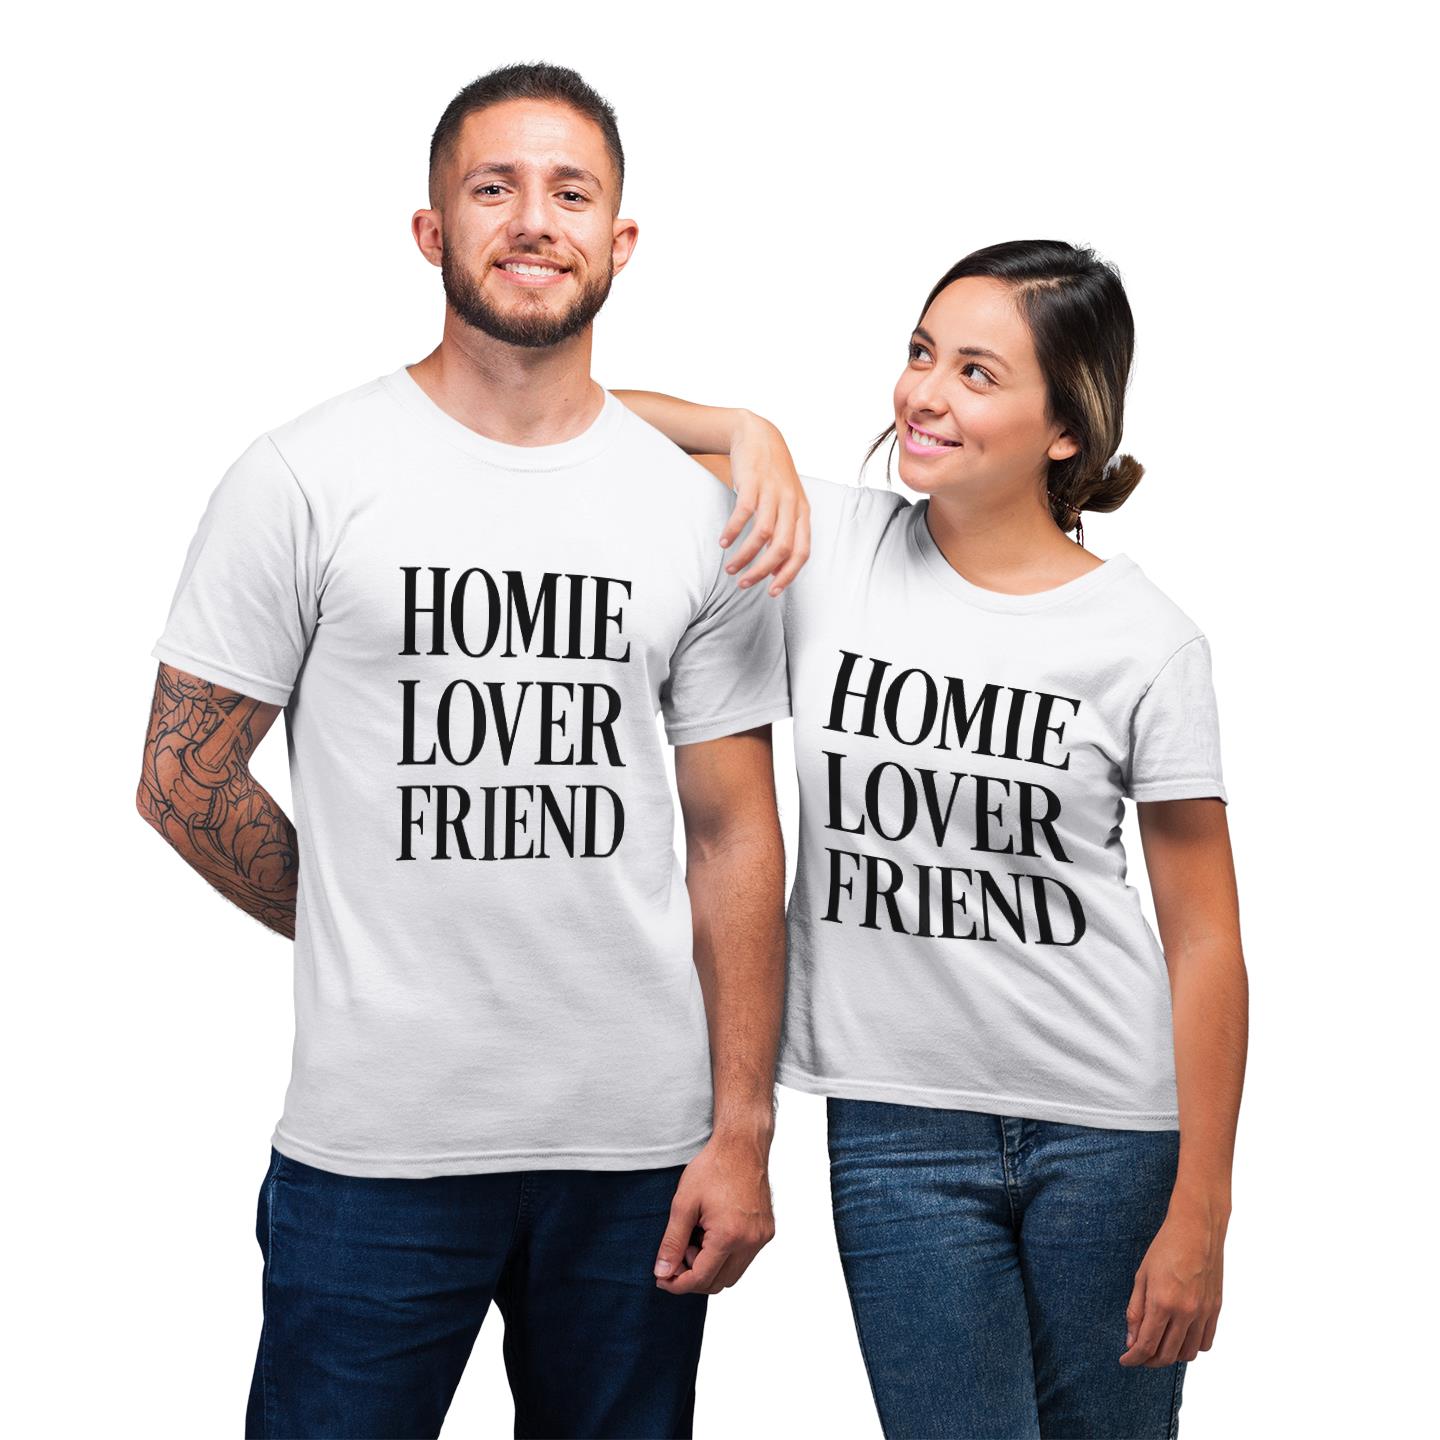 Homie Lover Friend His And Her Shirt For Couples Lover Matching T-shirt